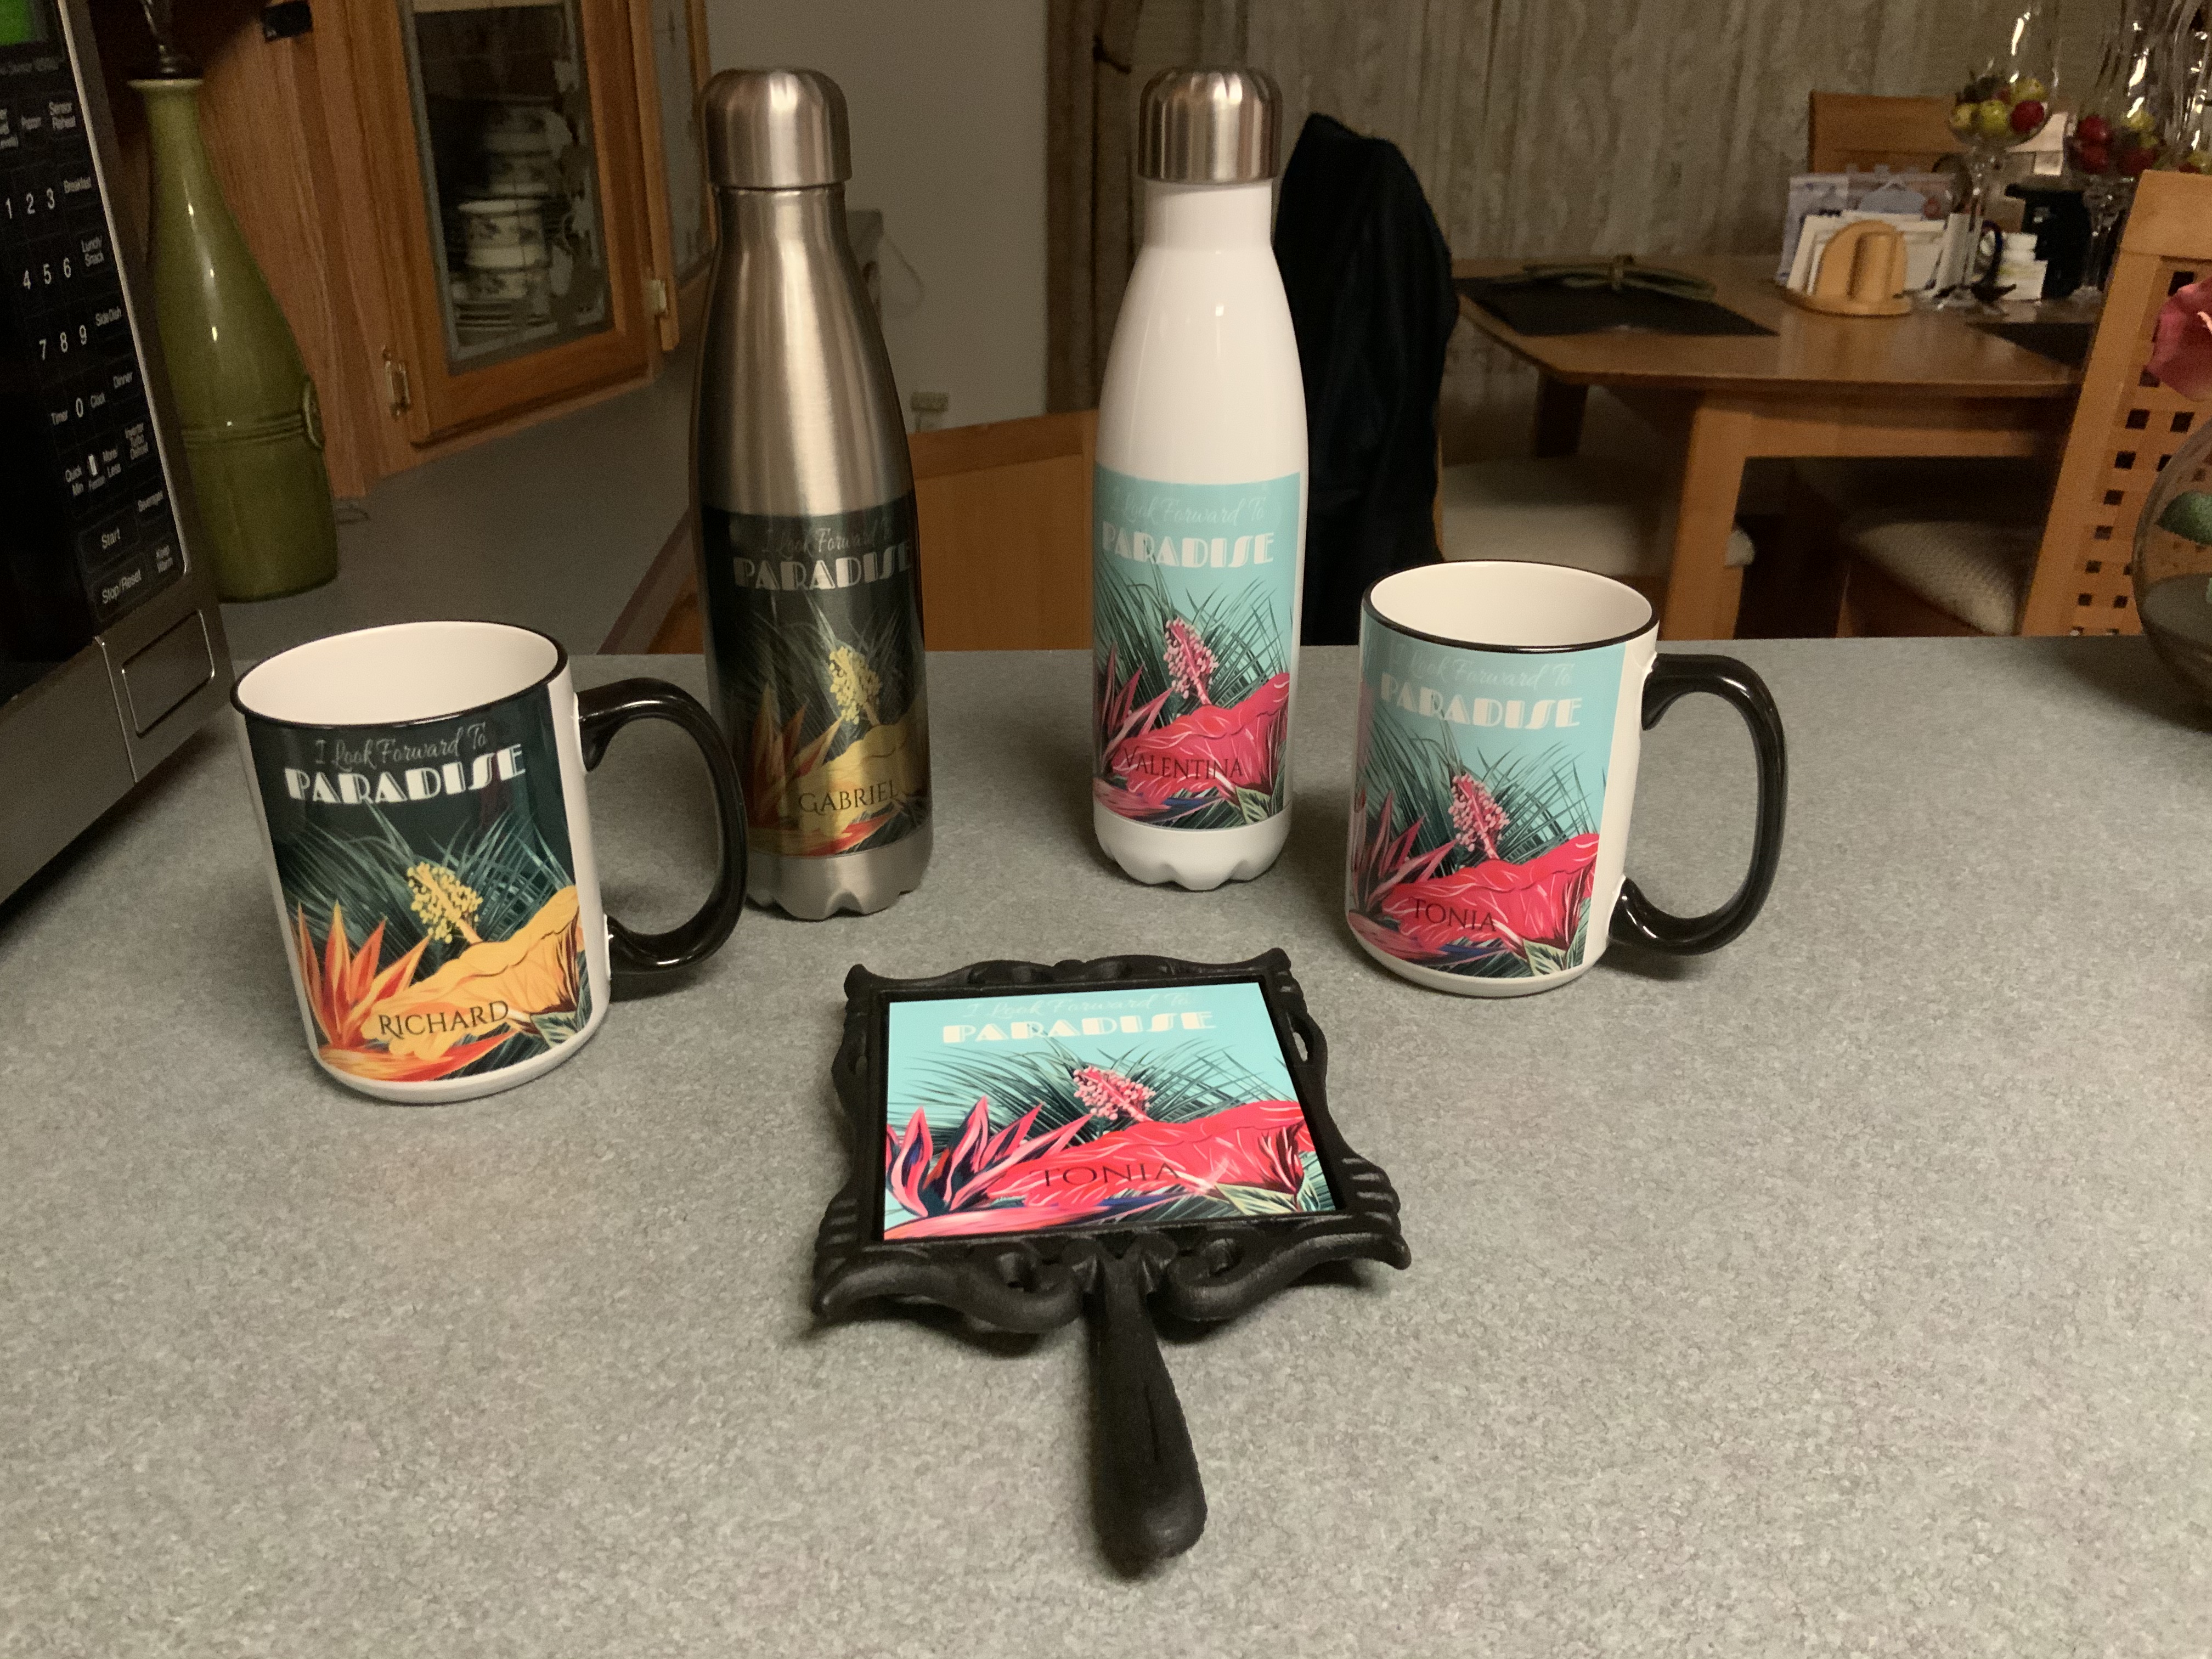 Drinkware made with sublimation printing